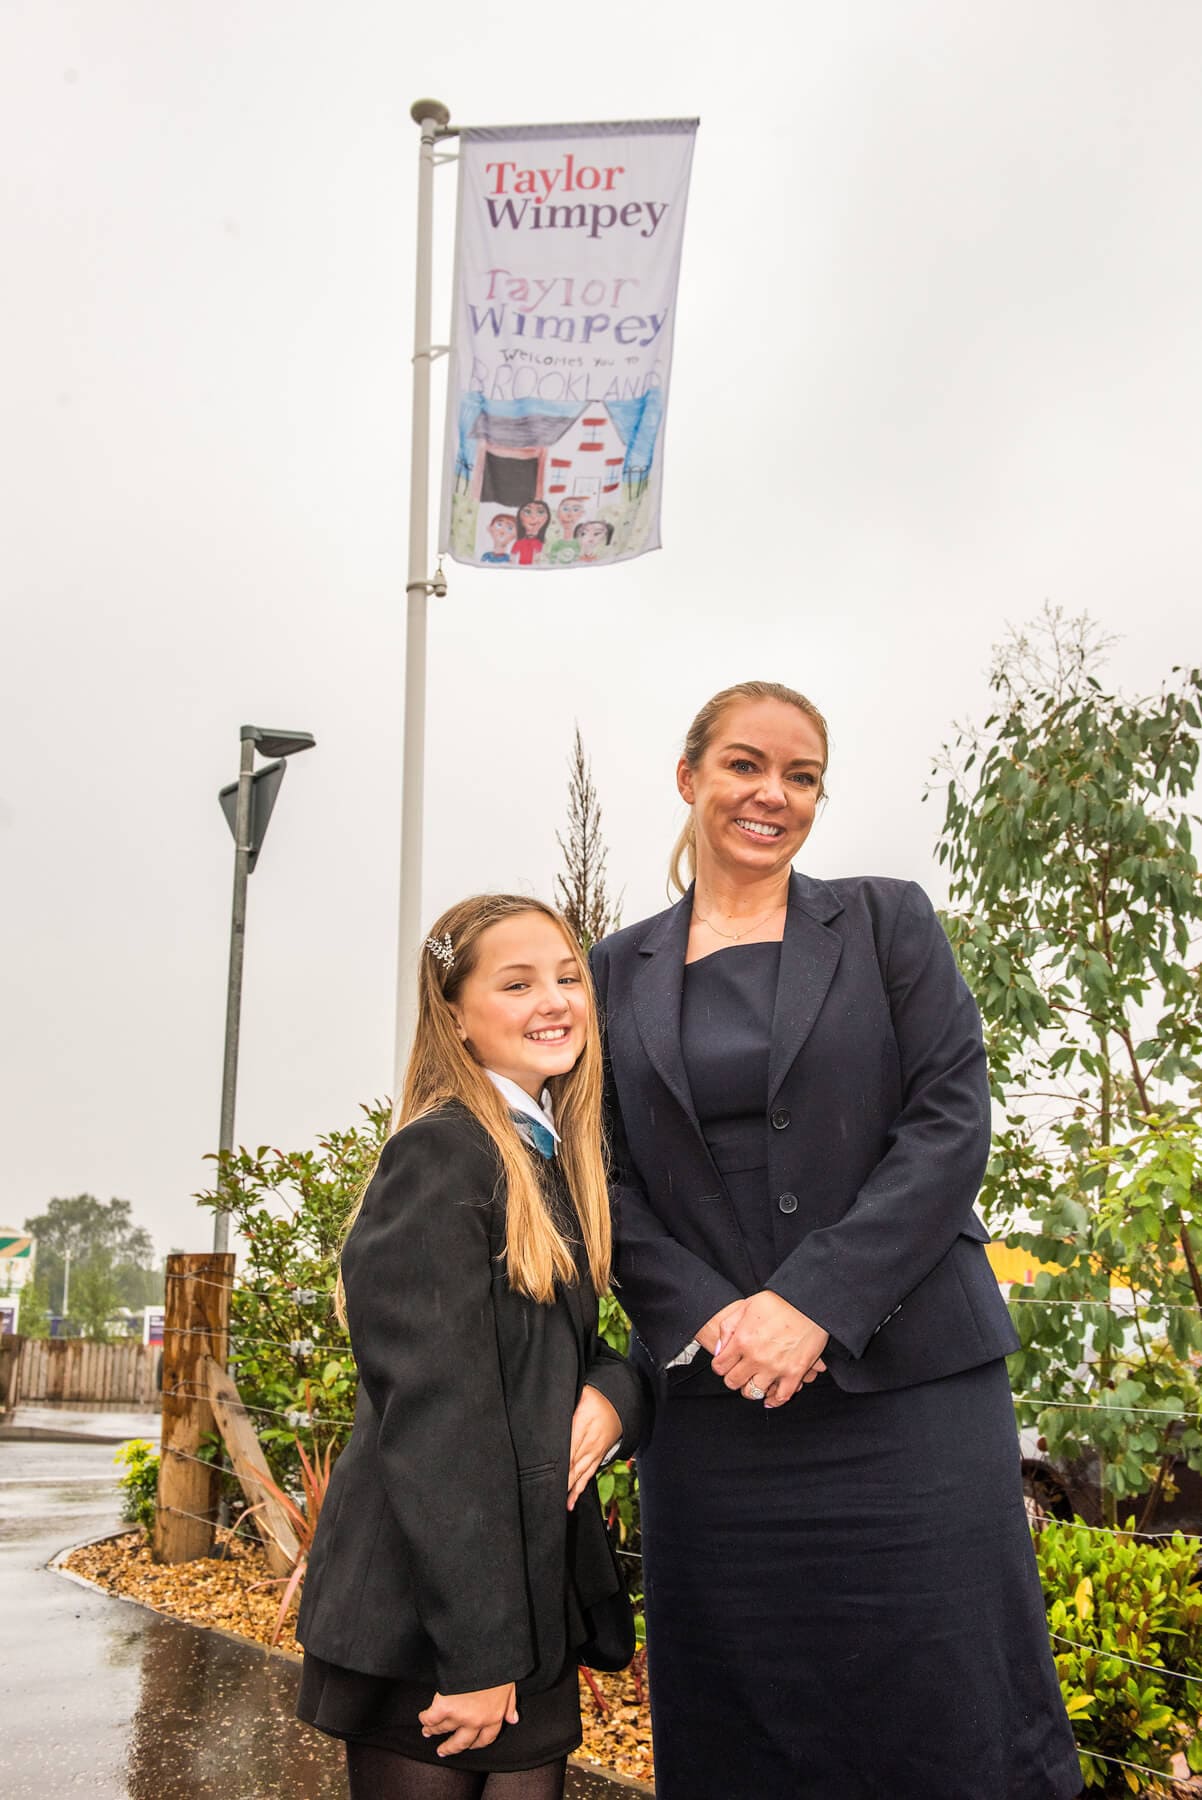 Flag design competition Brooklands Taylor Wimpey